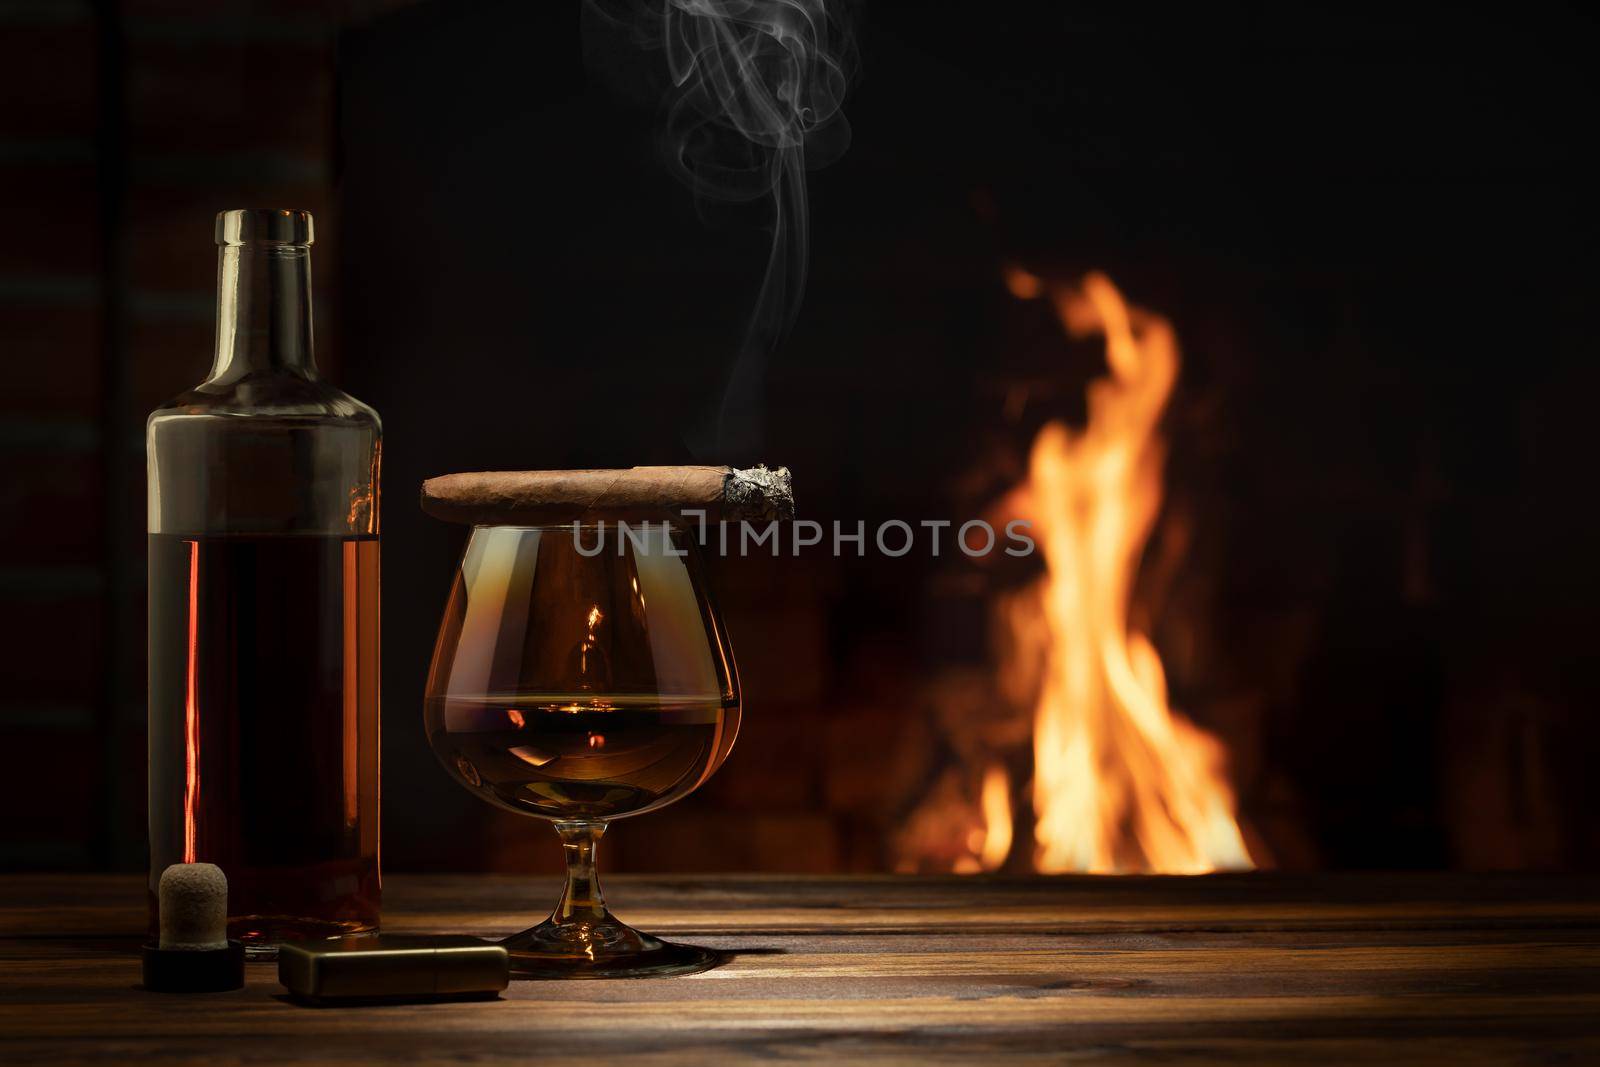 Glass of cognac, a cigar, a bottle on the table near the burning fireplace. Relaxation and enjoyment concept by galsand